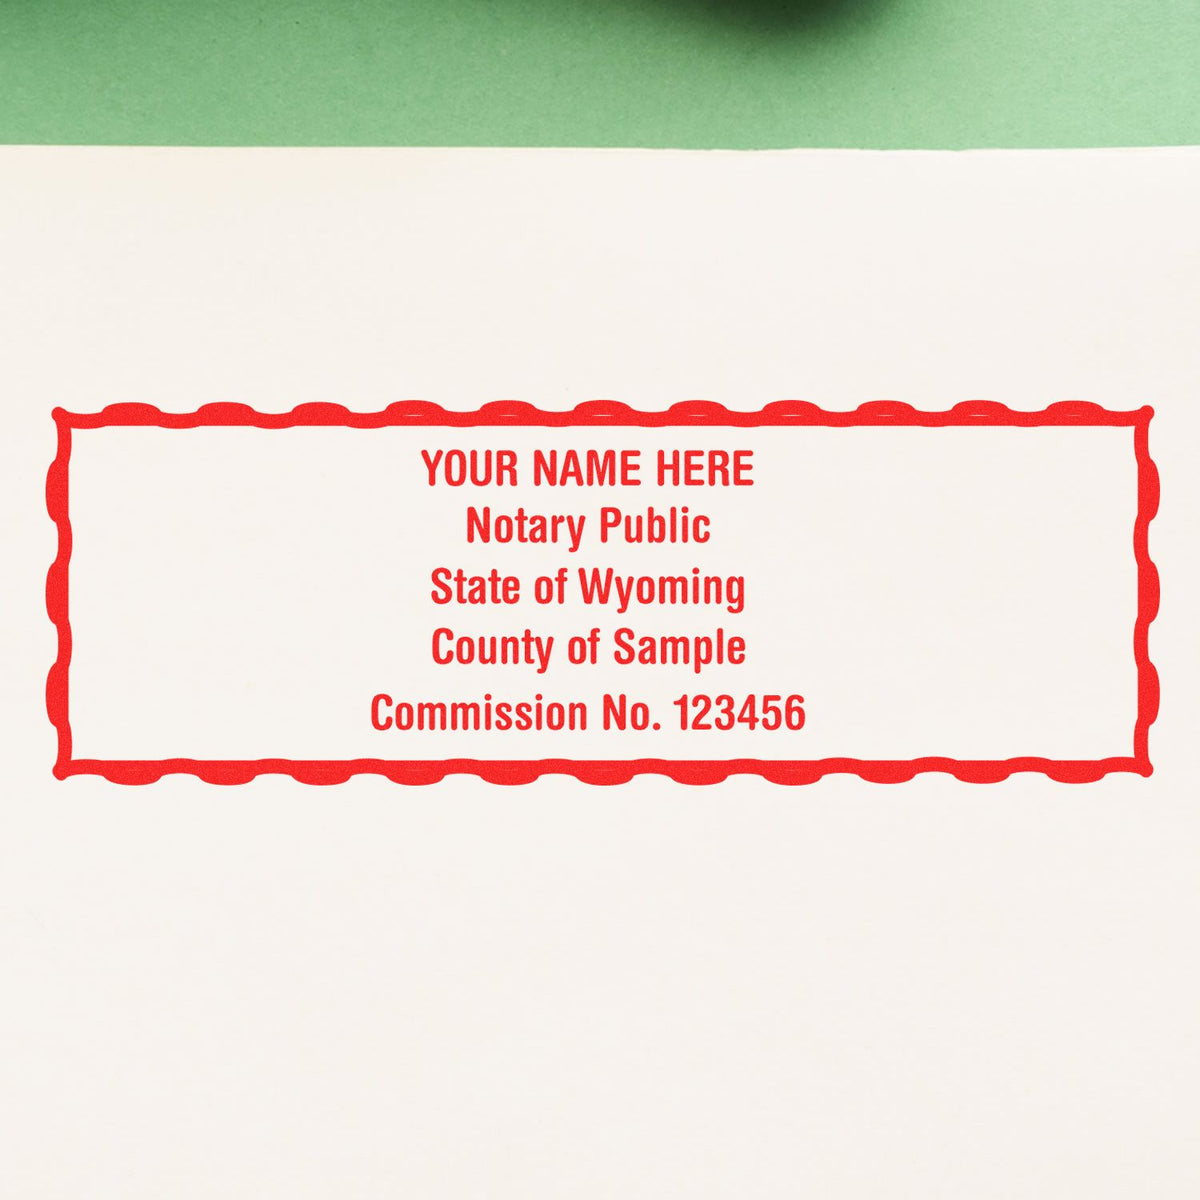 The Self-Inking Rectangular Wyoming Notary Stamp stamp impression comes to life with a crisp, detailed photo on paper - showcasing true professional quality.